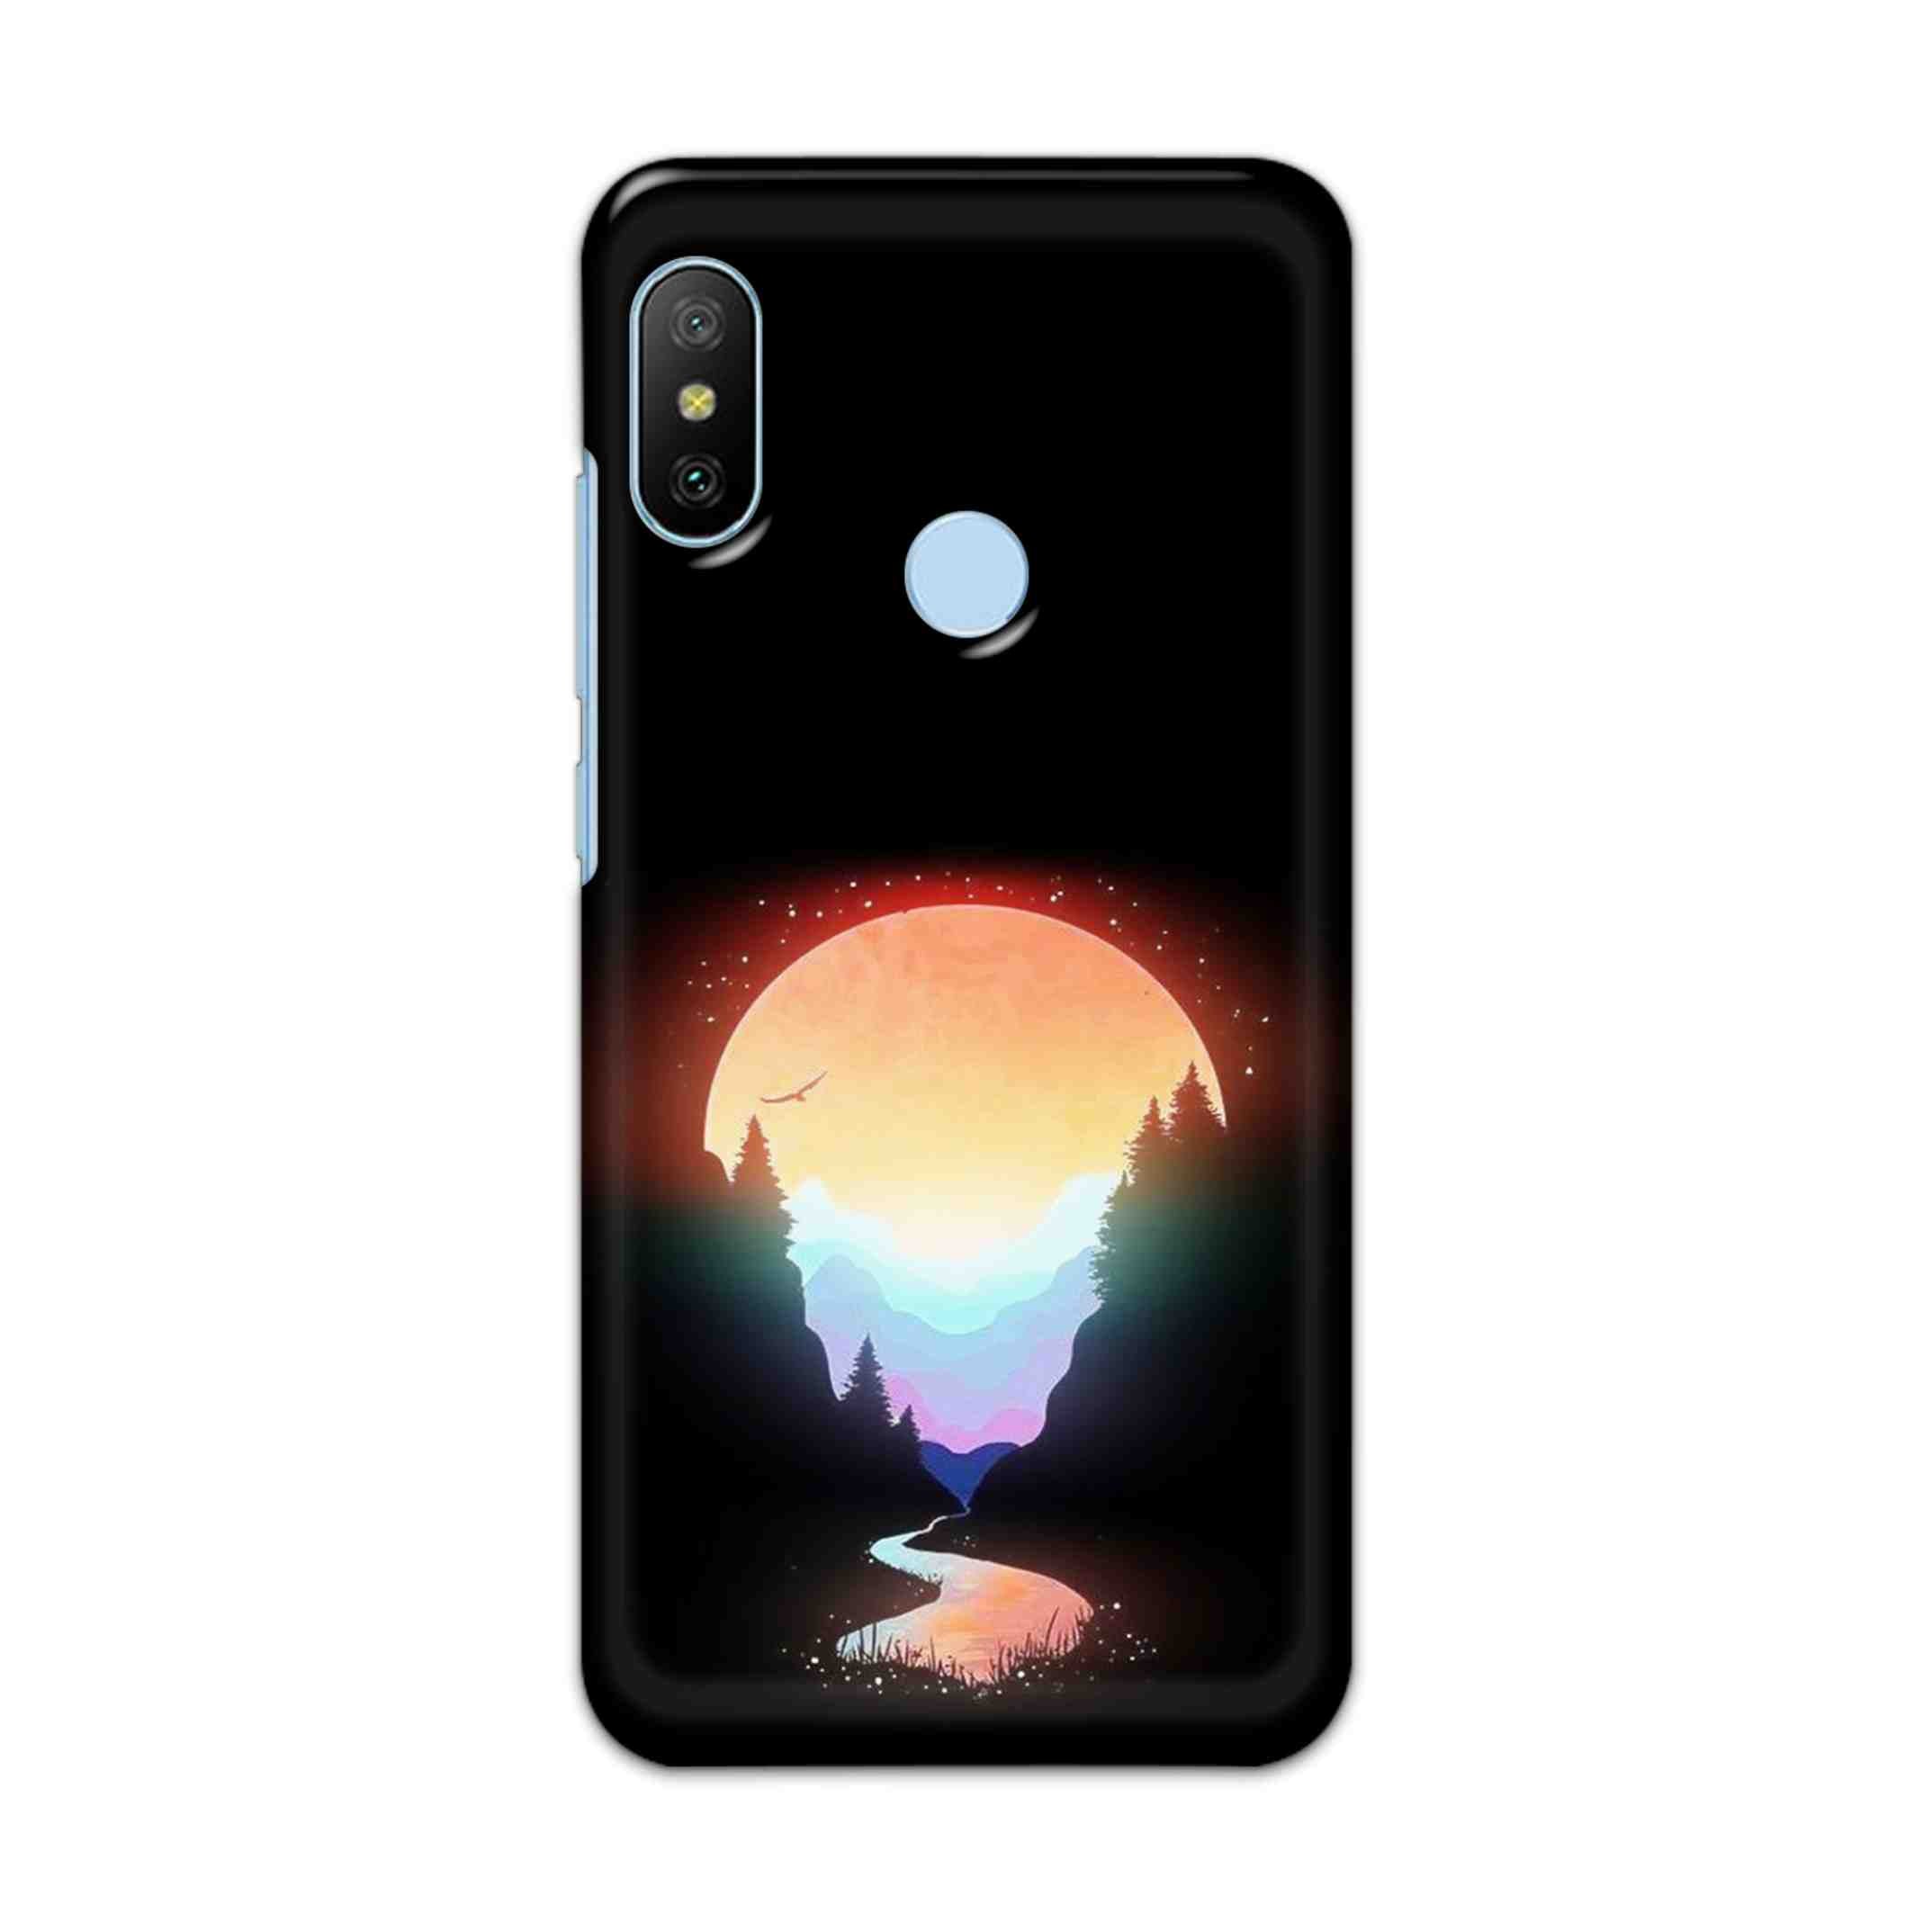 Buy Rainbow Hard Back Mobile Phone Case/Cover For Xiaomi Redmi 6 Pro Online